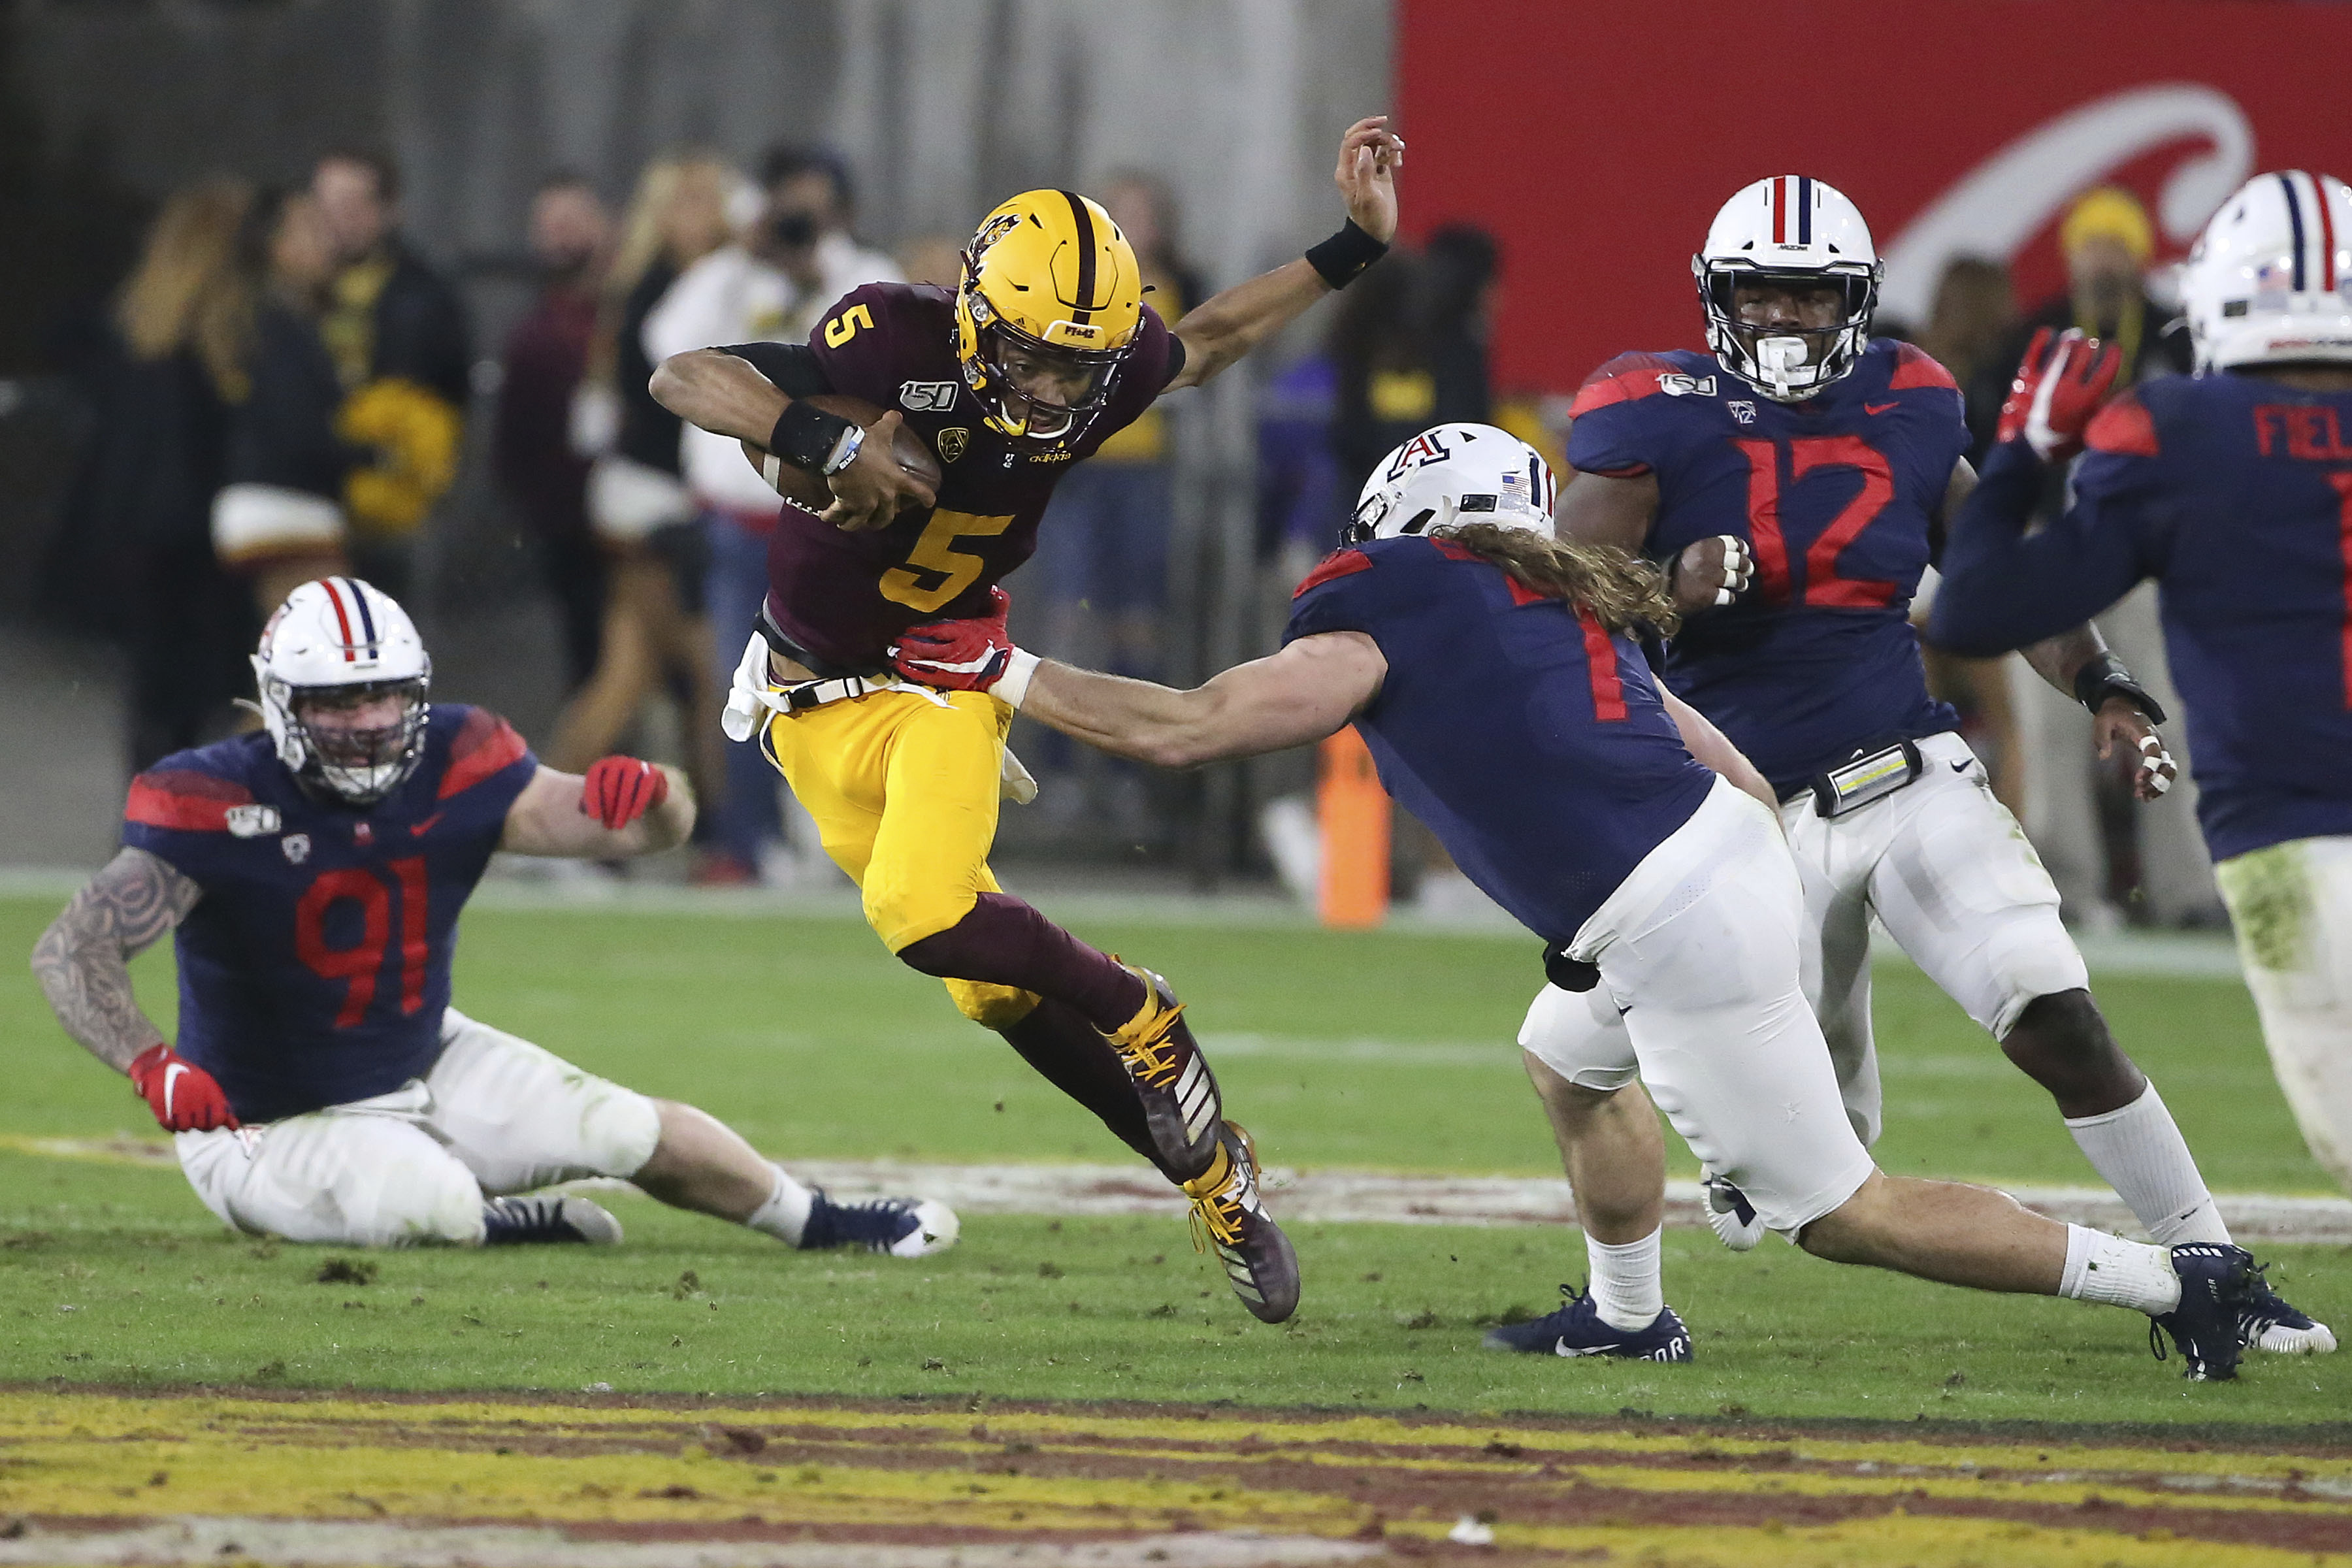 Arizona State grinds out 24-14 win over rival Arizona | The Daily